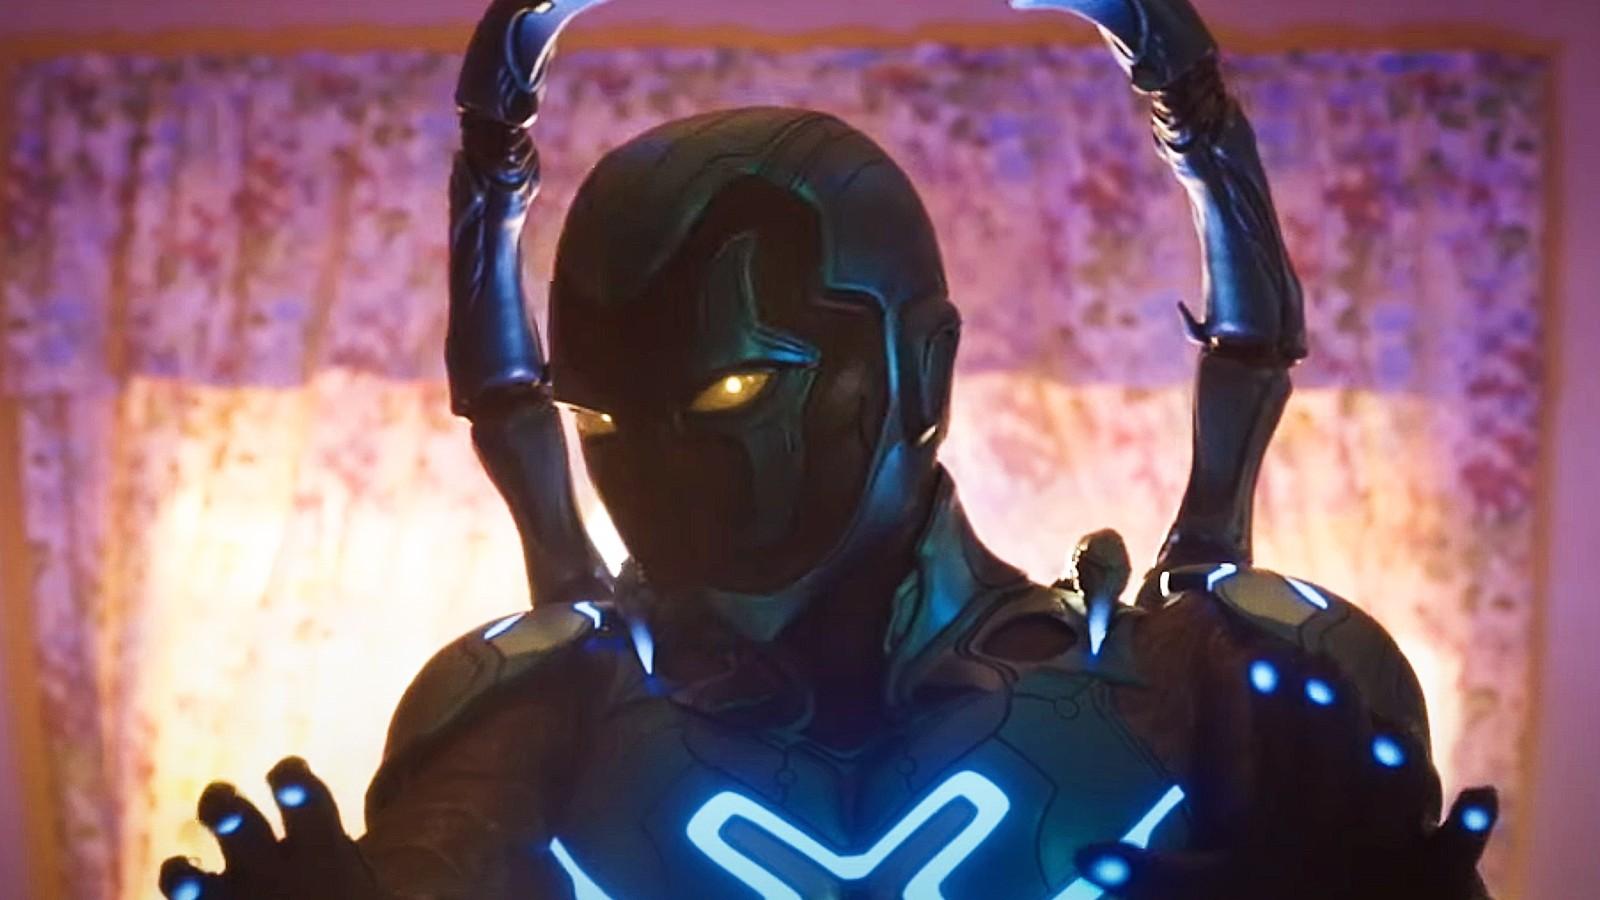 Blue Beetle: How to watch it at home